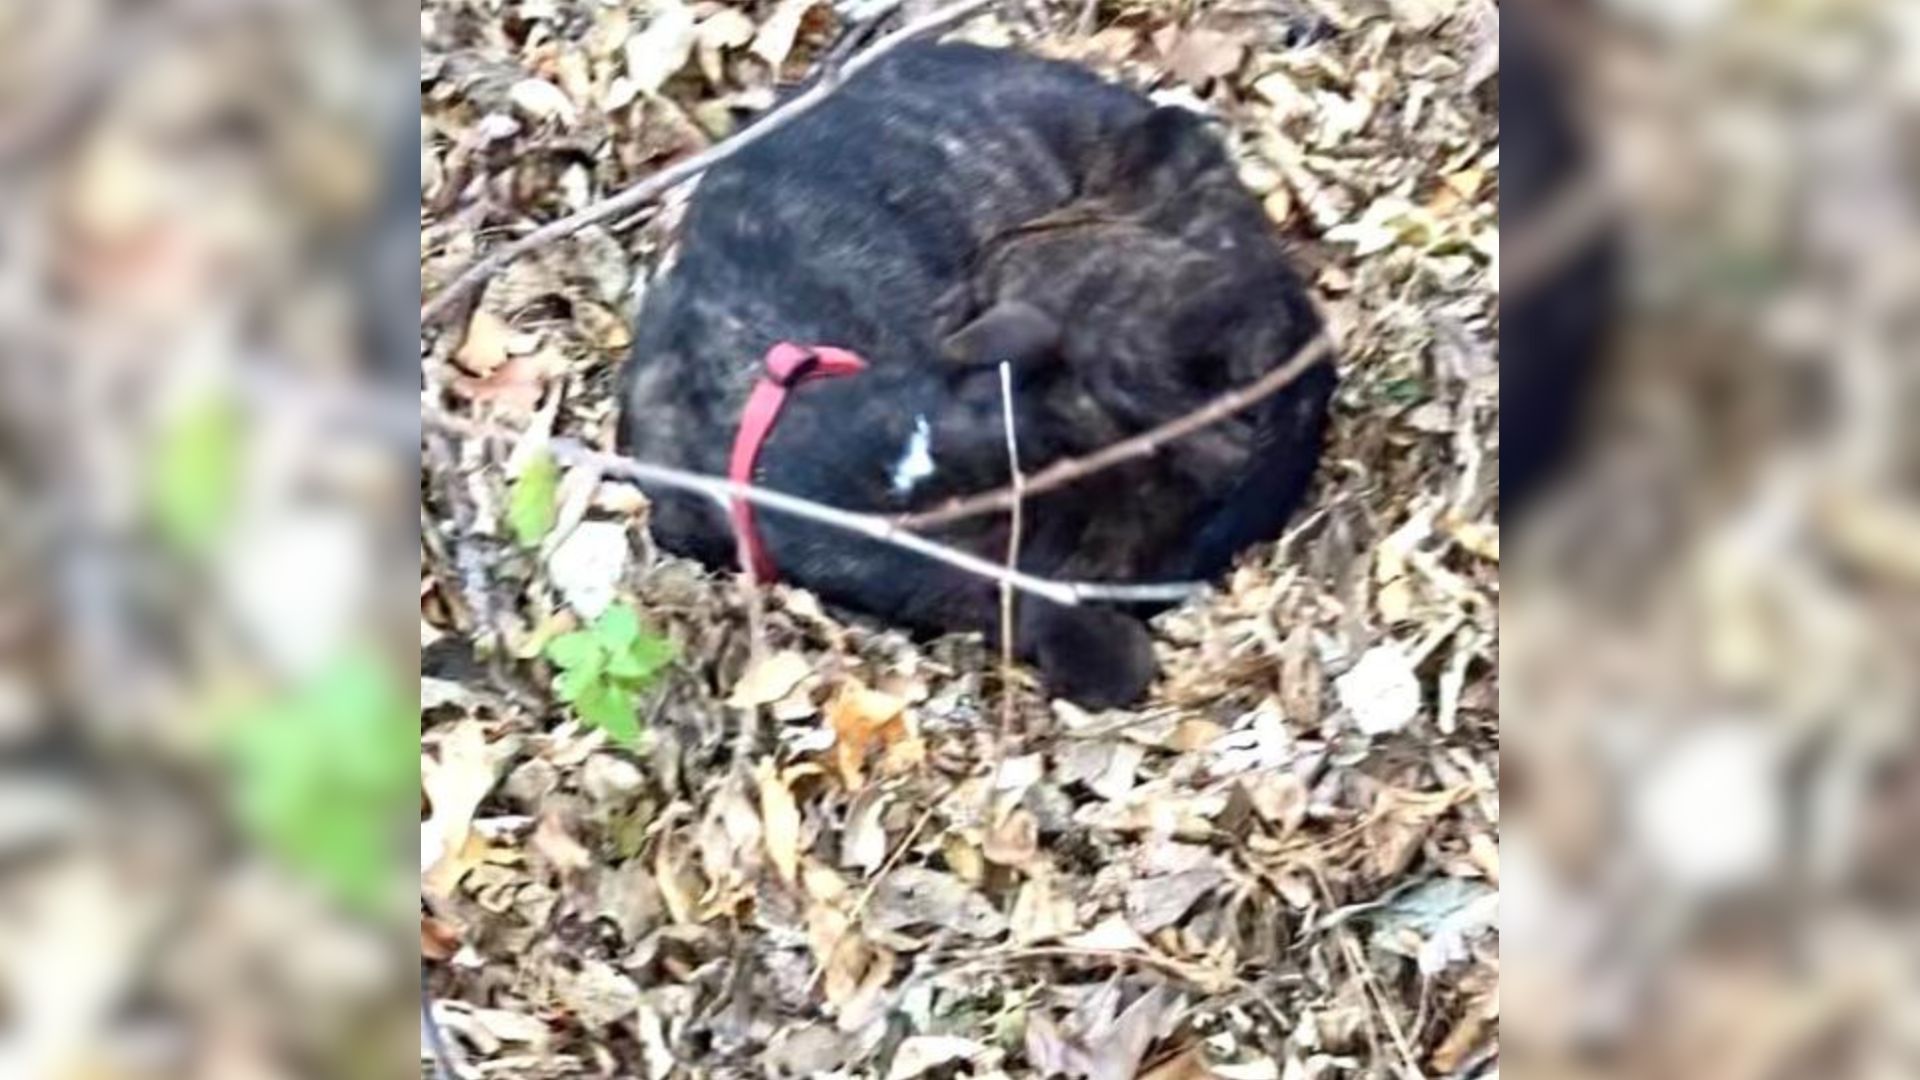 Starving Dog Found Curled Up In A Pile Of Leaves, Waiting For Someone To Help Him